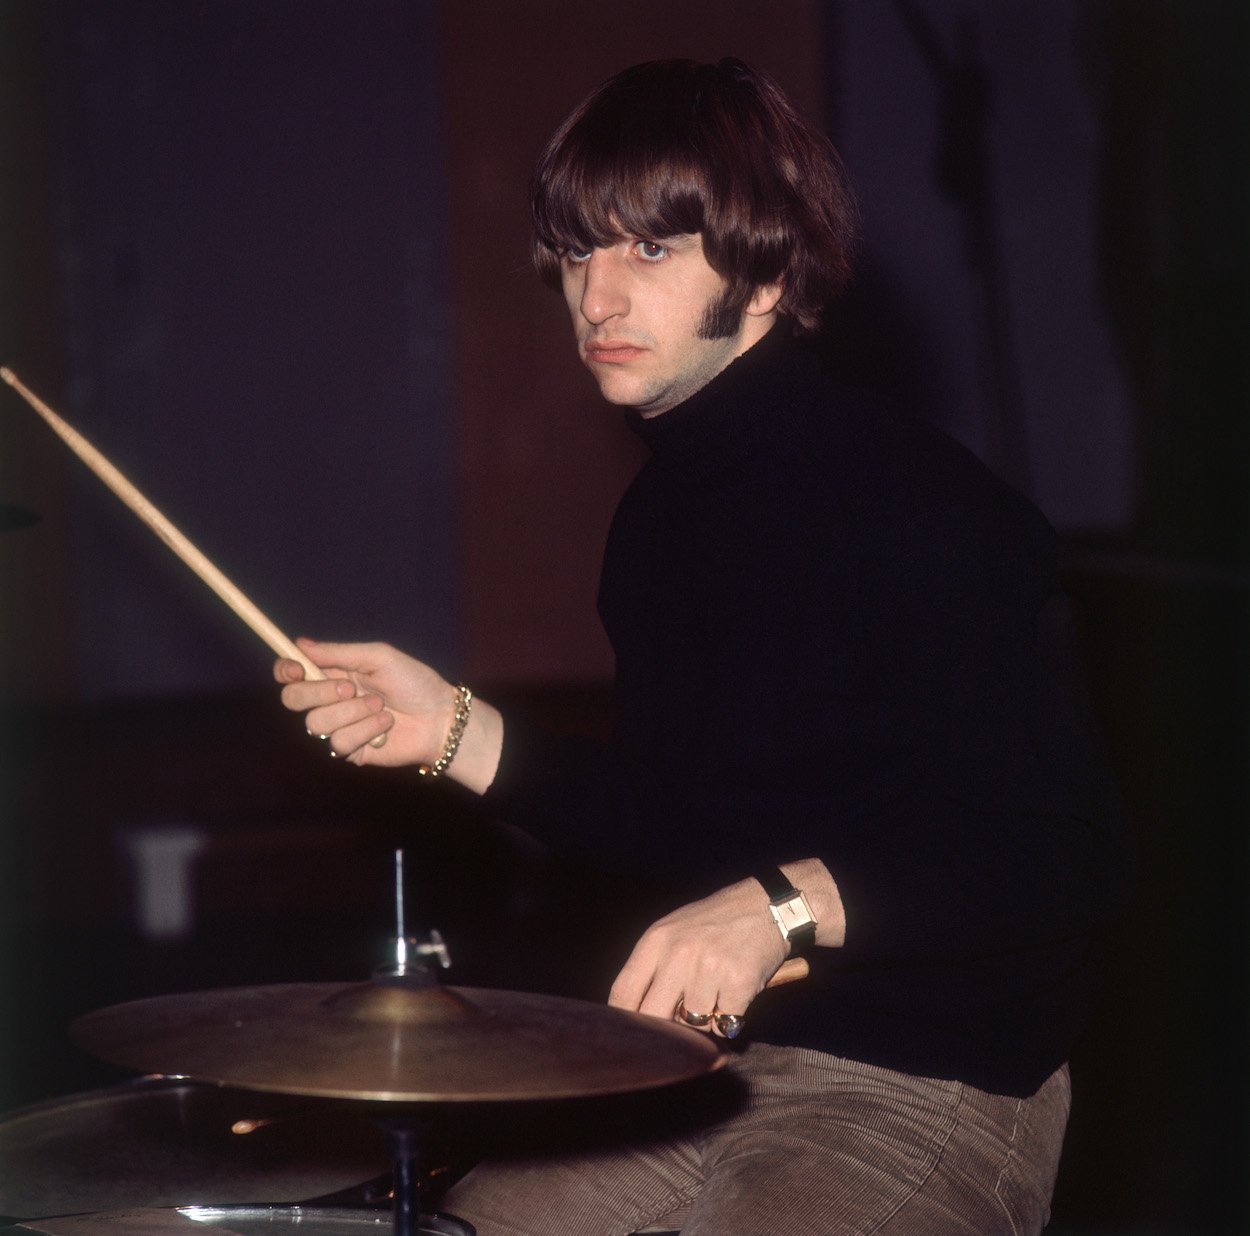 Ringo Starr, who changed drumming forever with his playing style according to a Rock & Roll Hall of Fame member, rehearses in 1966.